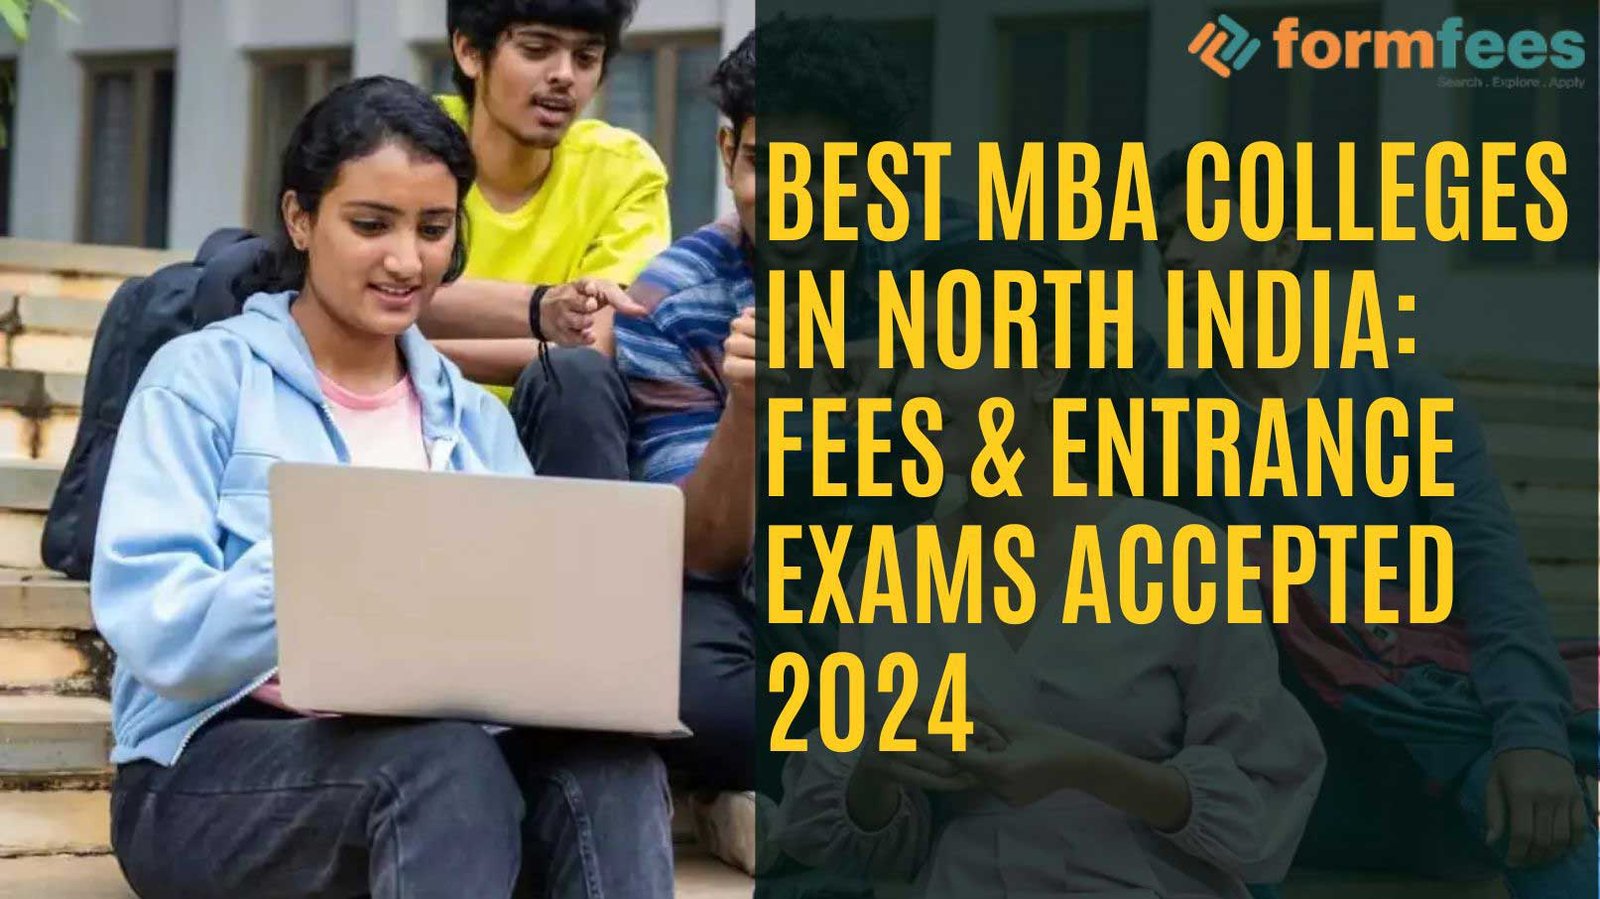 Best MBA Colleges in North India: Fees & Entrance Exams Accepted 2024